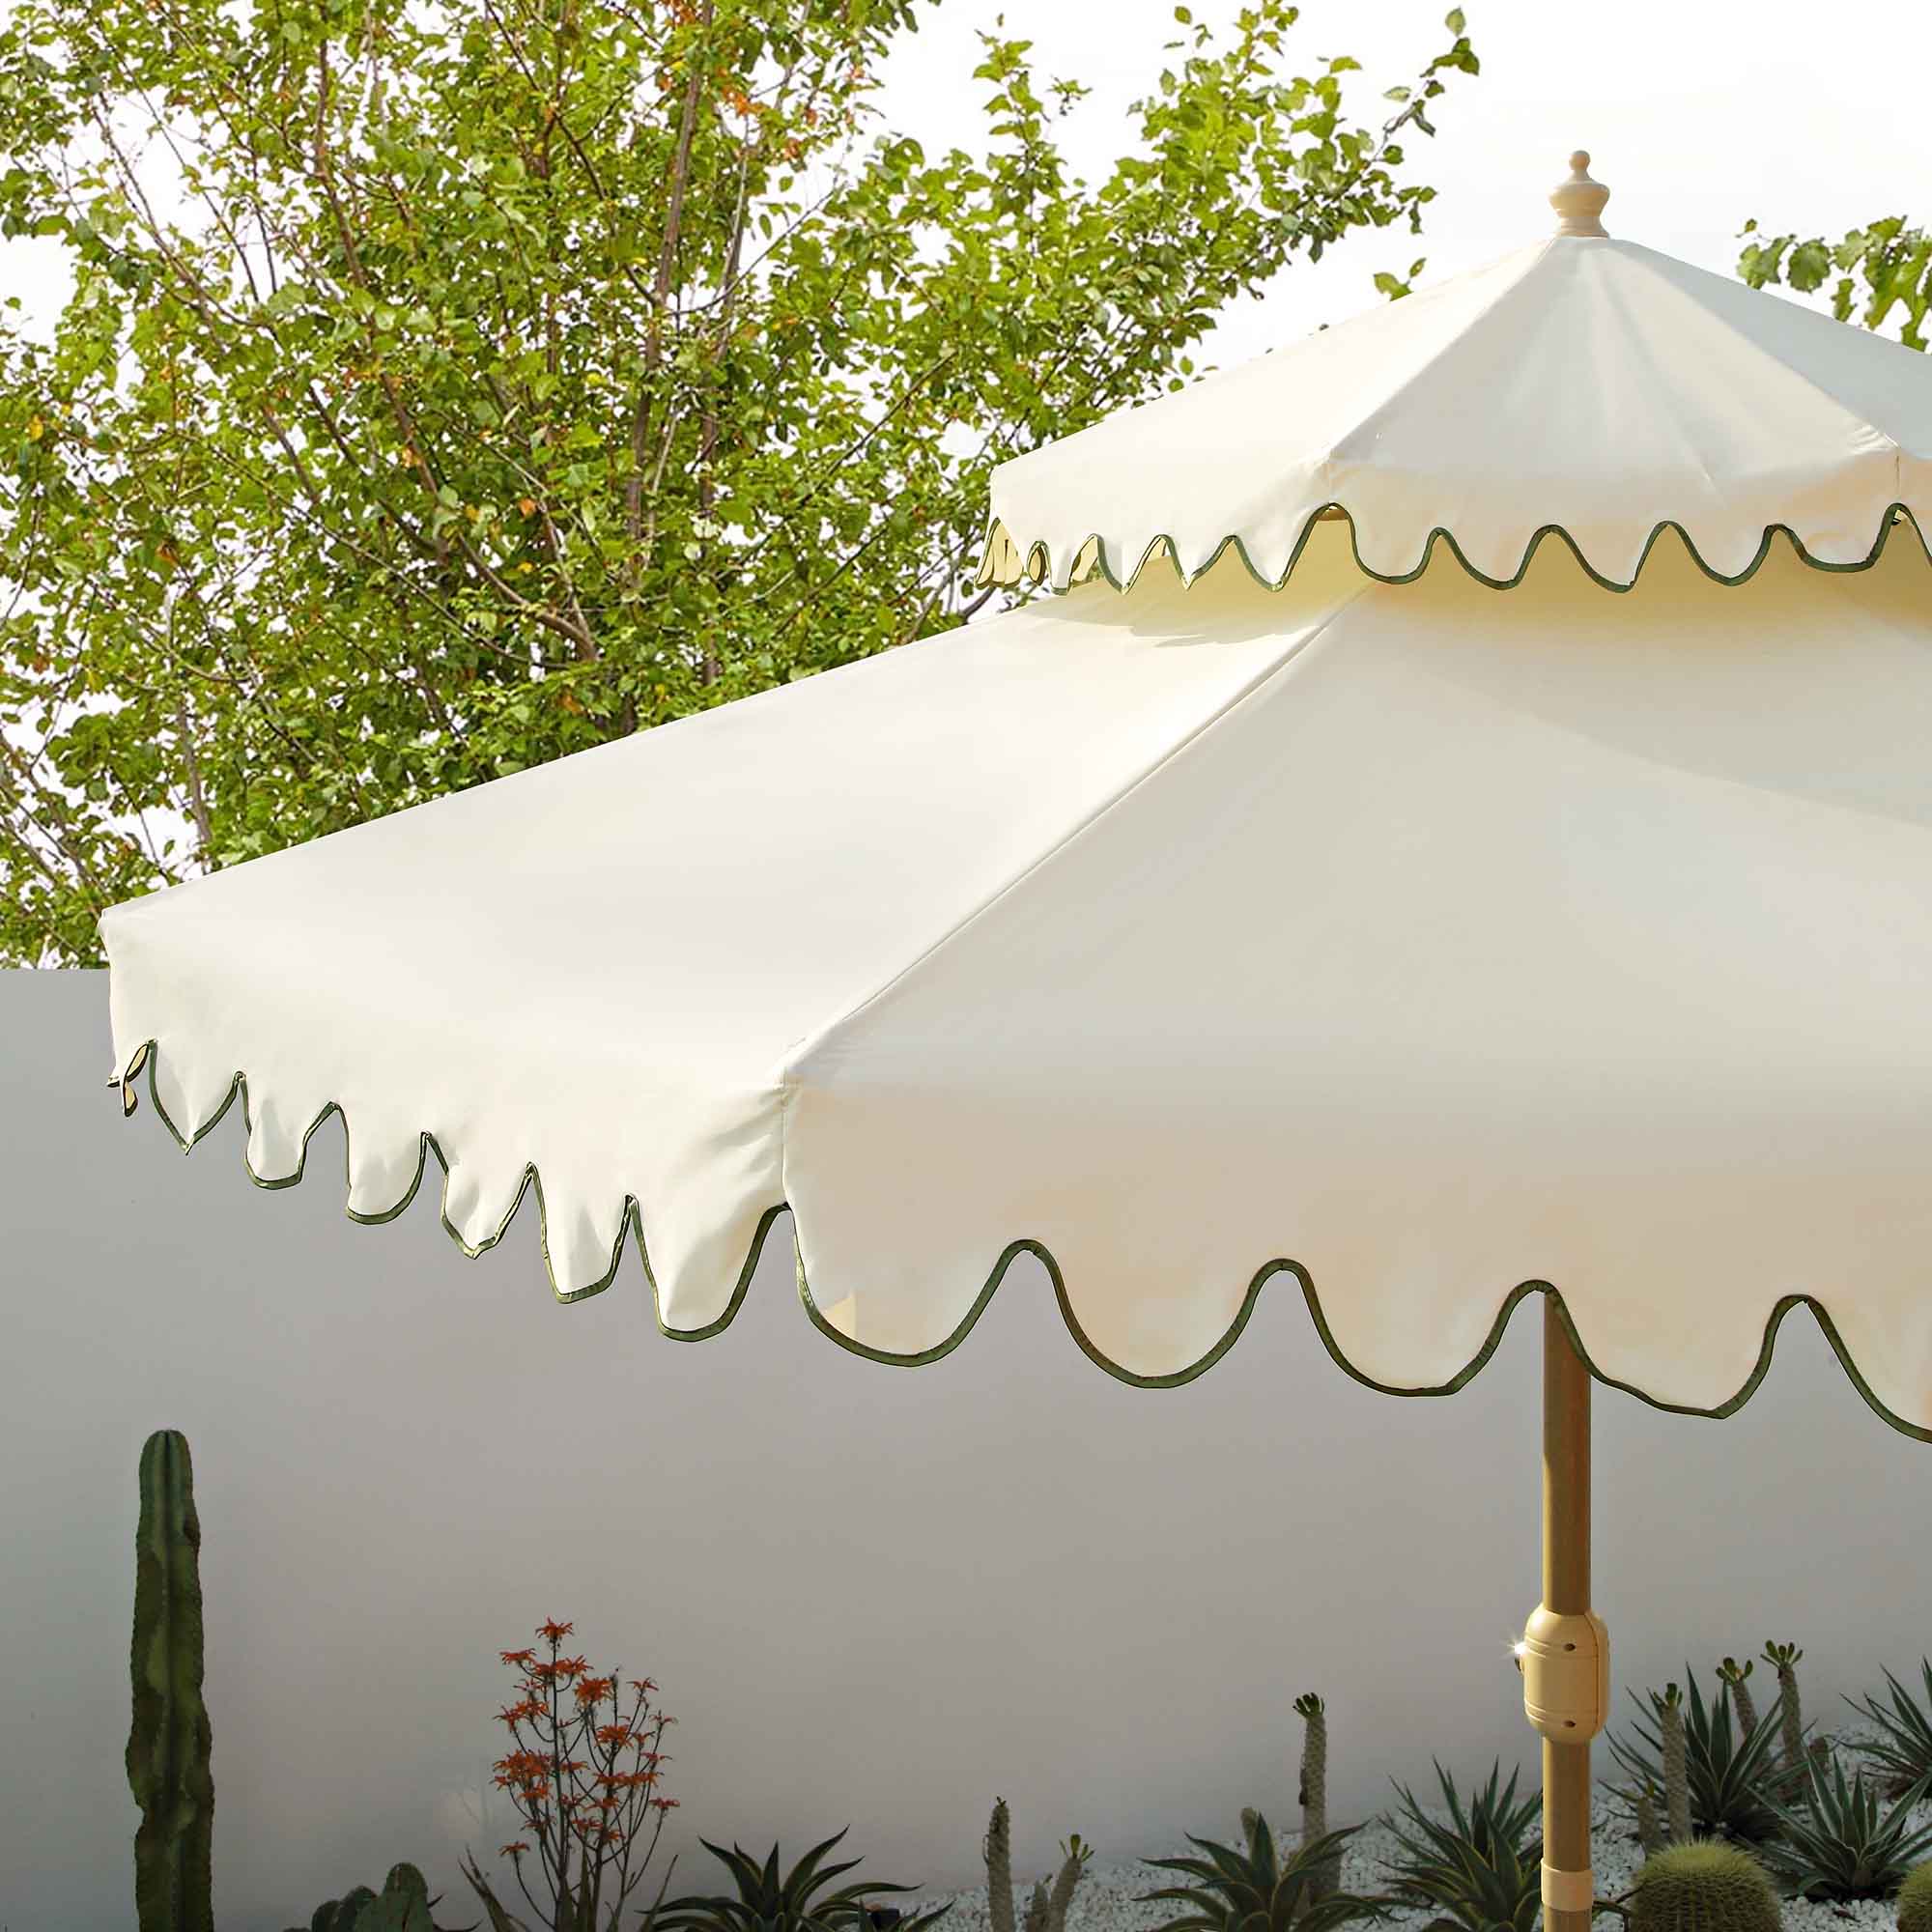 Fabienne Beige 3M Octagonal Double Top Crank and Tilt Parasol with Green Scalloped Edge